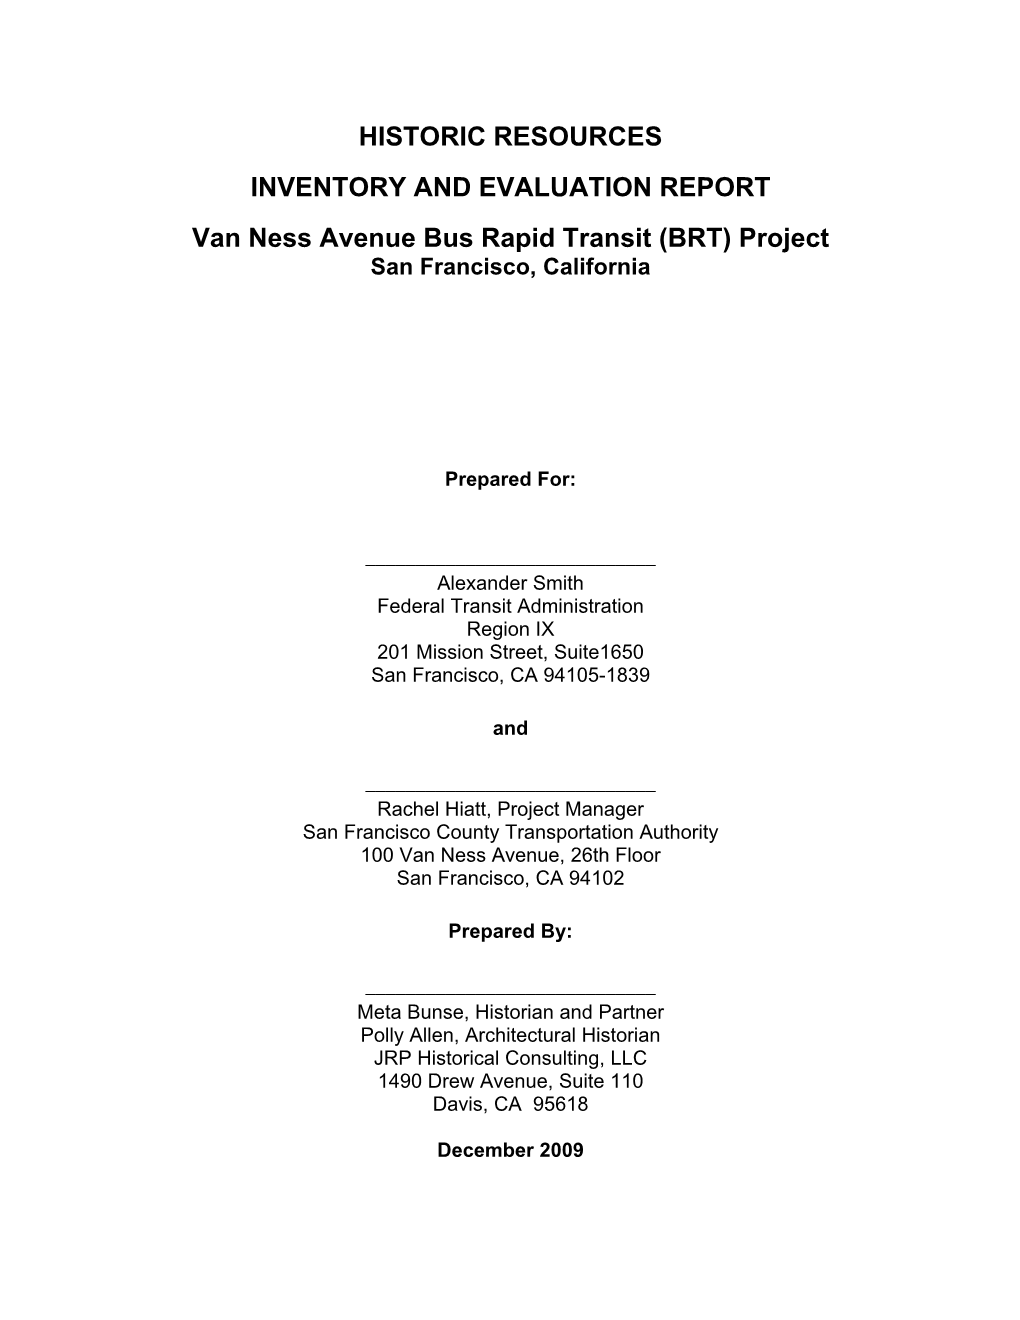 HISTORIC RESOURCES INVENTORY and EVALUATION REPORT Van Ness Avenue Bus Rapid Transit (BRT) Project San Francisco, California